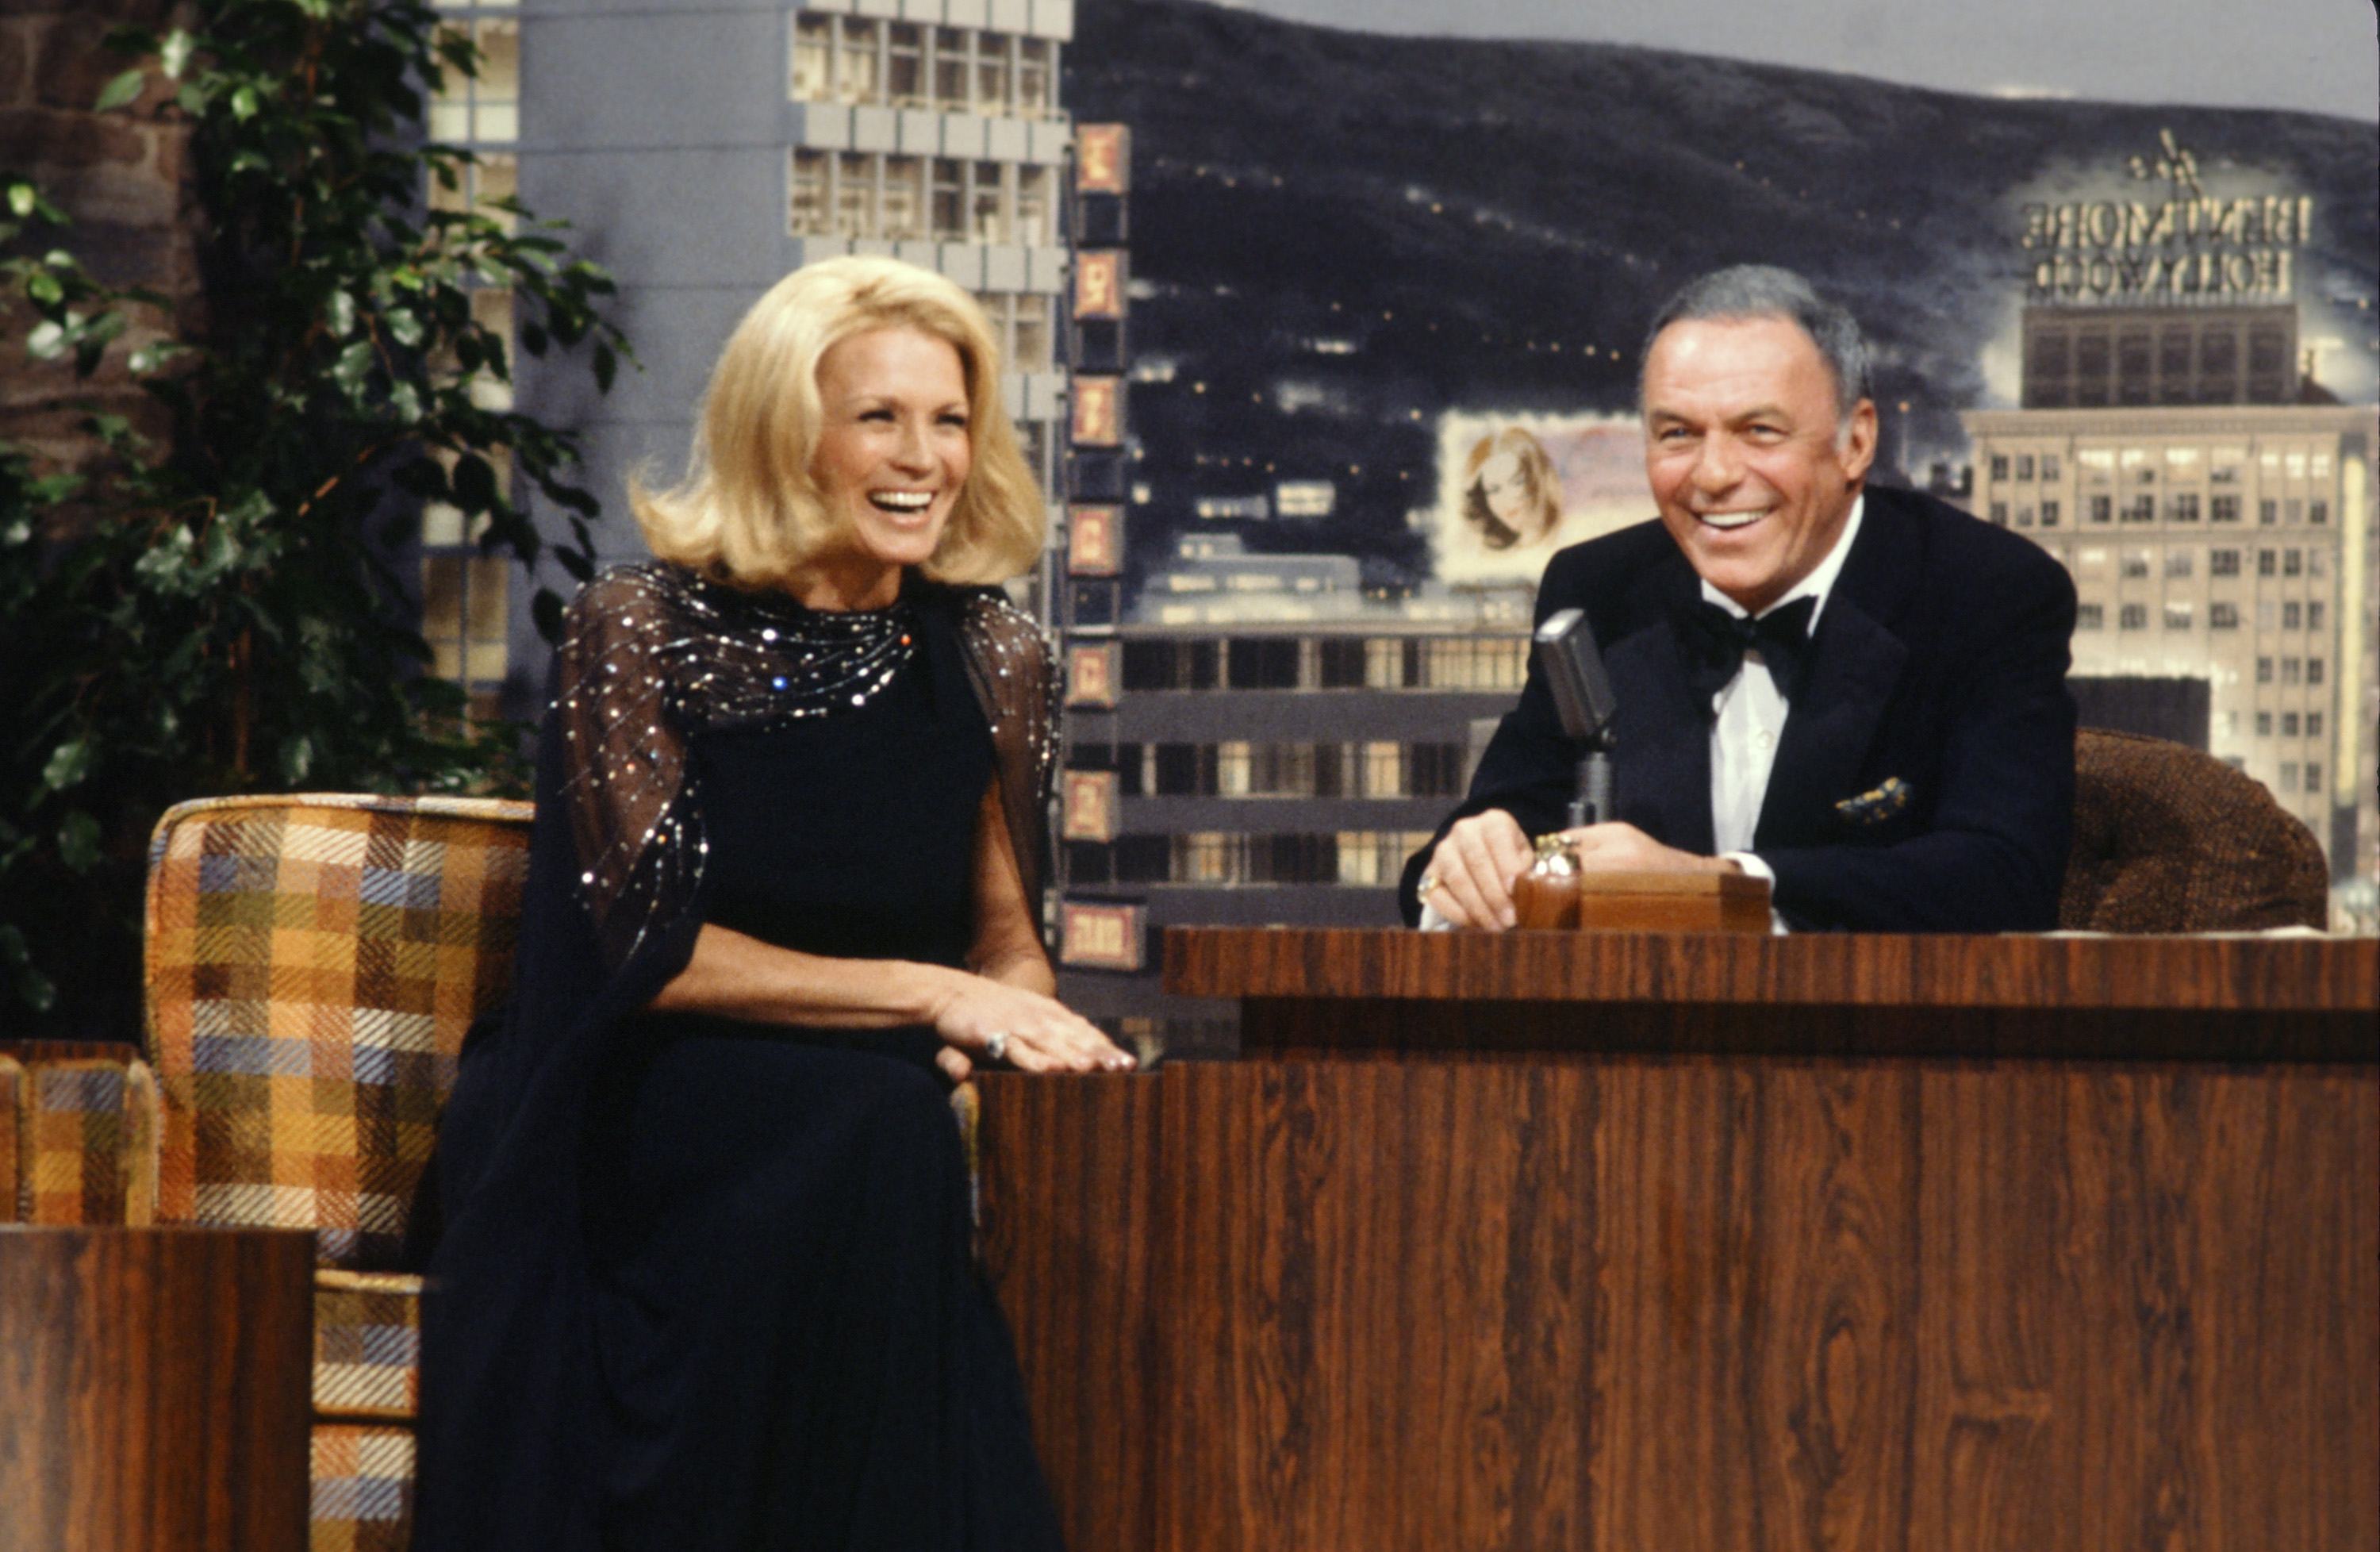 Angie Dickinson with Frank Sinatra as guest host on "The Tonight Show Starring Johnny Carson" on November 14, 1977 | Source: Getty Images